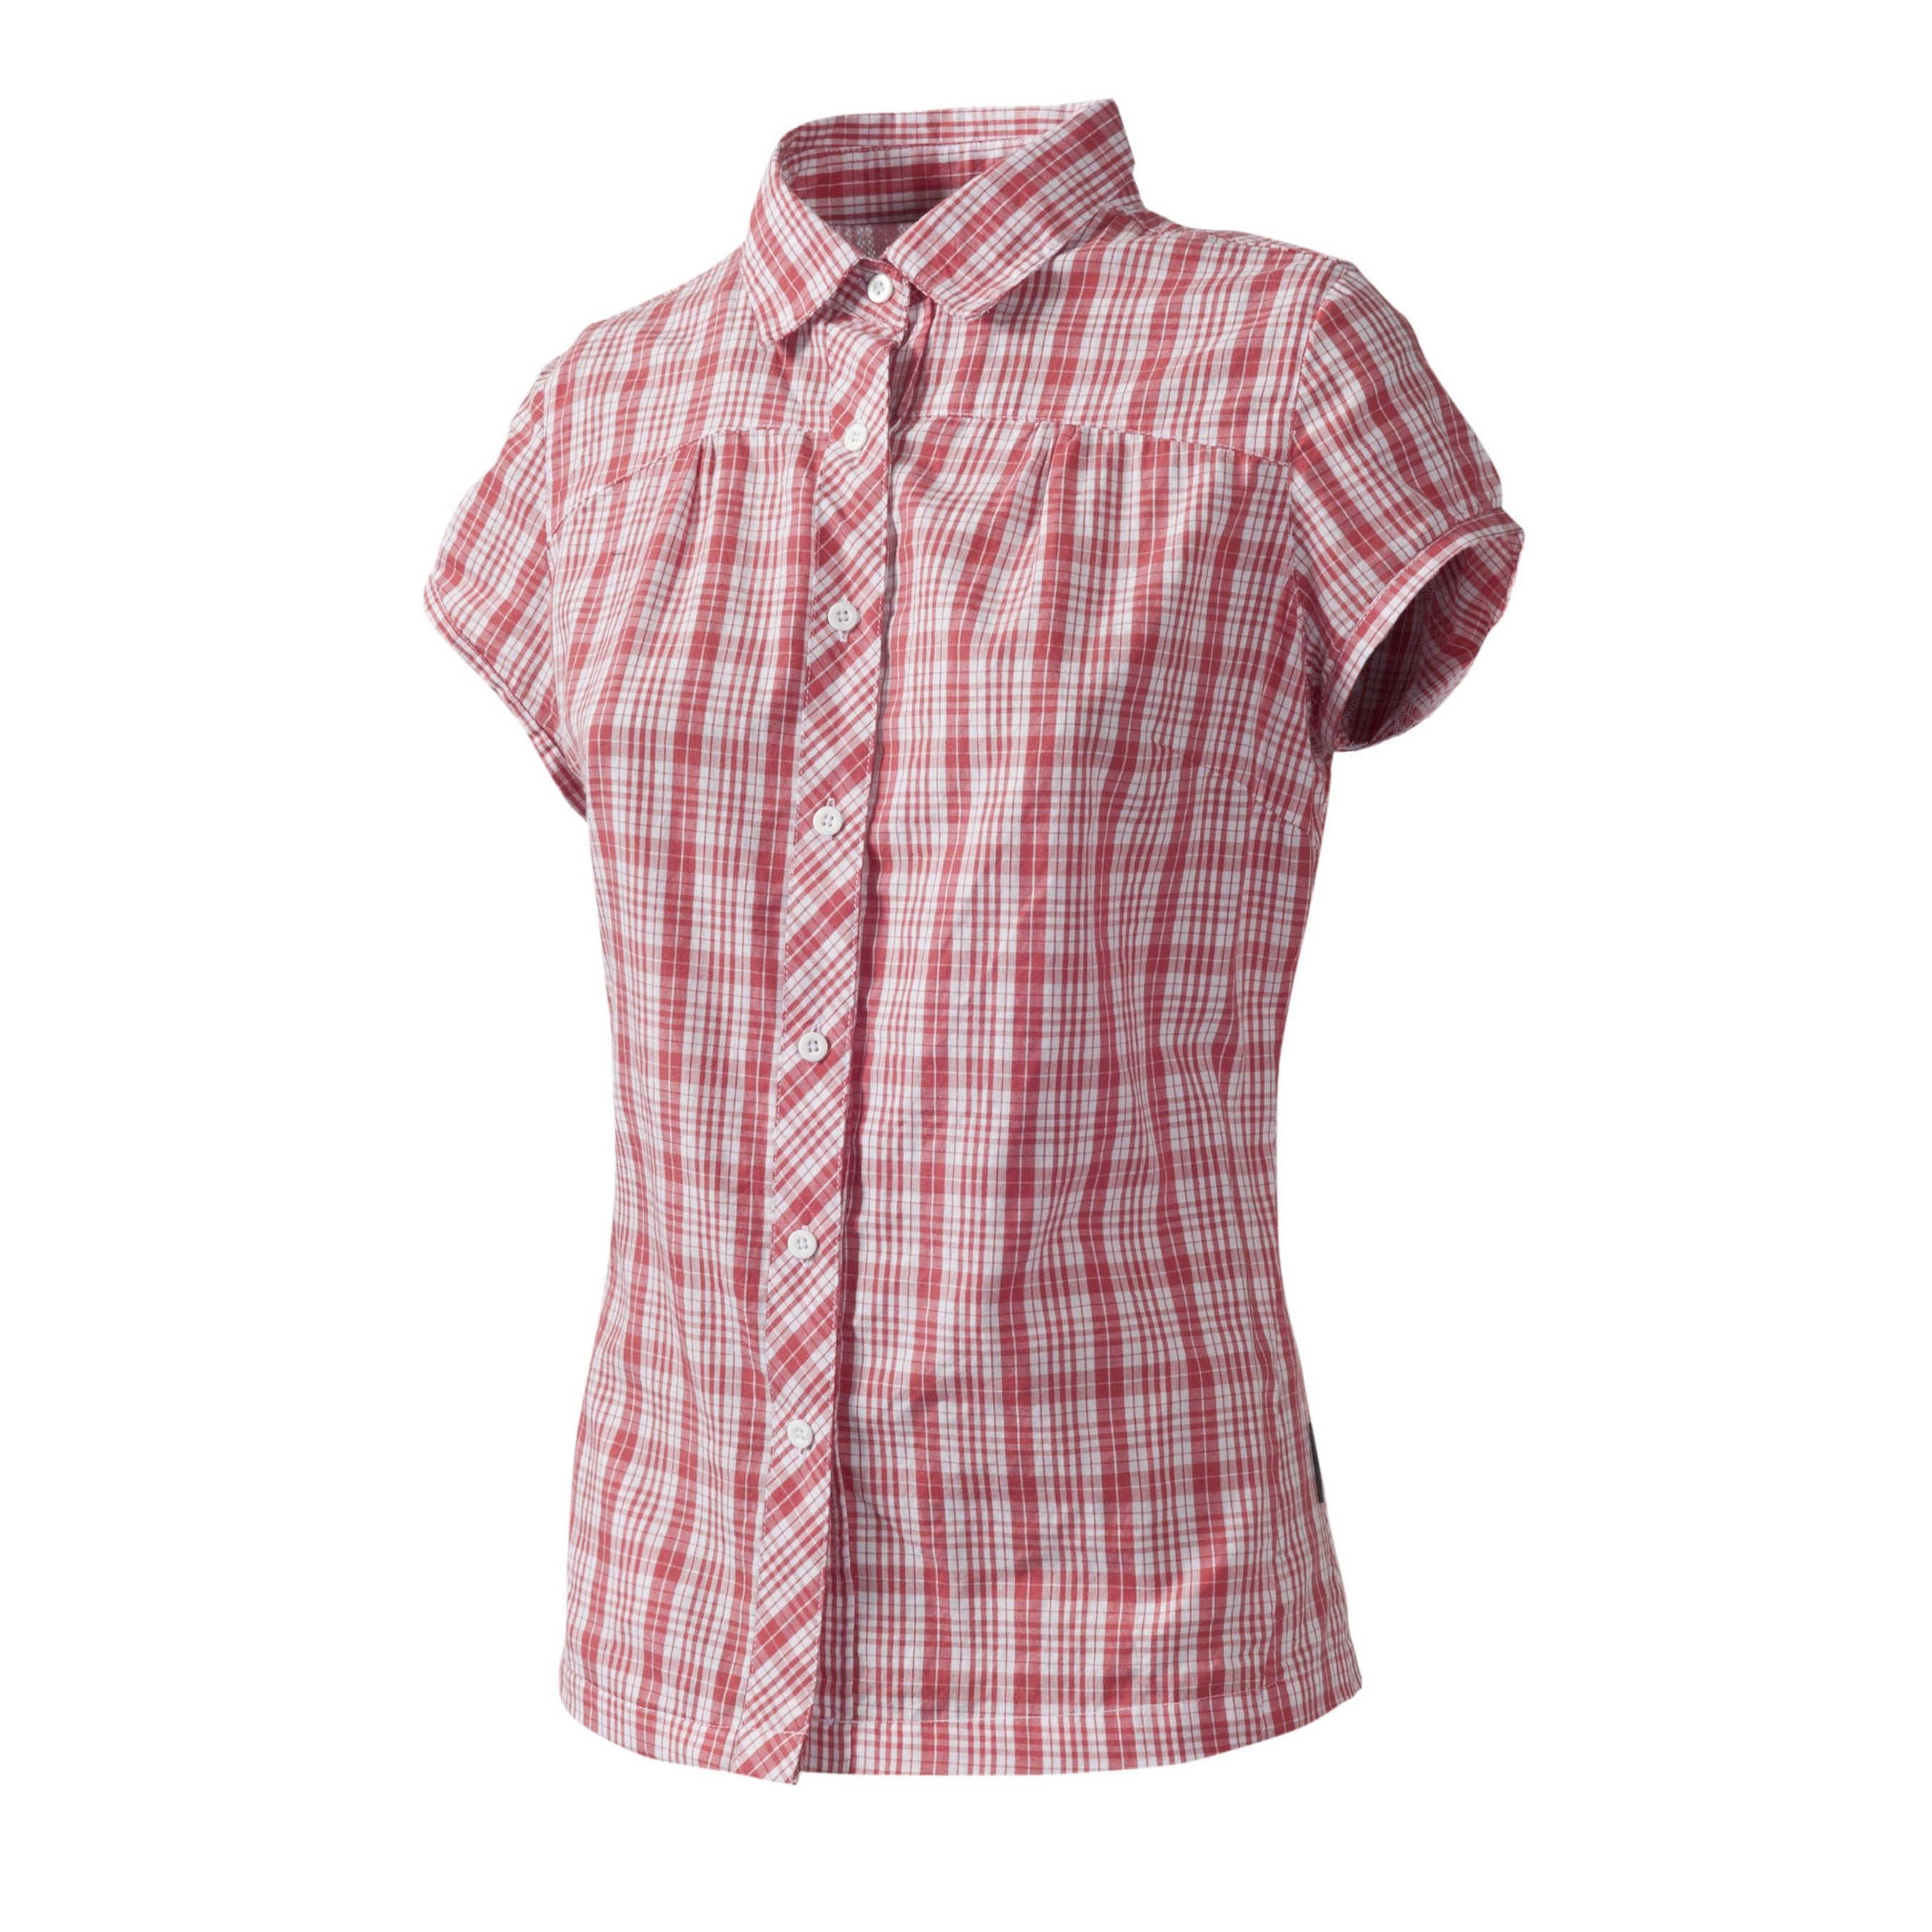 Womens blouse. Short sleeves. 2 piece collar. 1 concealed zip pocket. Ventilated mesh lined back yoke. Button fastening. 100% Cotton. Yarn dye check. Trespass Womens Chest Sizing (approx): XS/8 - 32in/81cm, S/10 - 34in/86cm, M/12 - 36in/91.4cm, L/14 - 38in/96.5cm, XL/16 - 40in/101.5cm, XXL/18 - 42in/106.5cm.